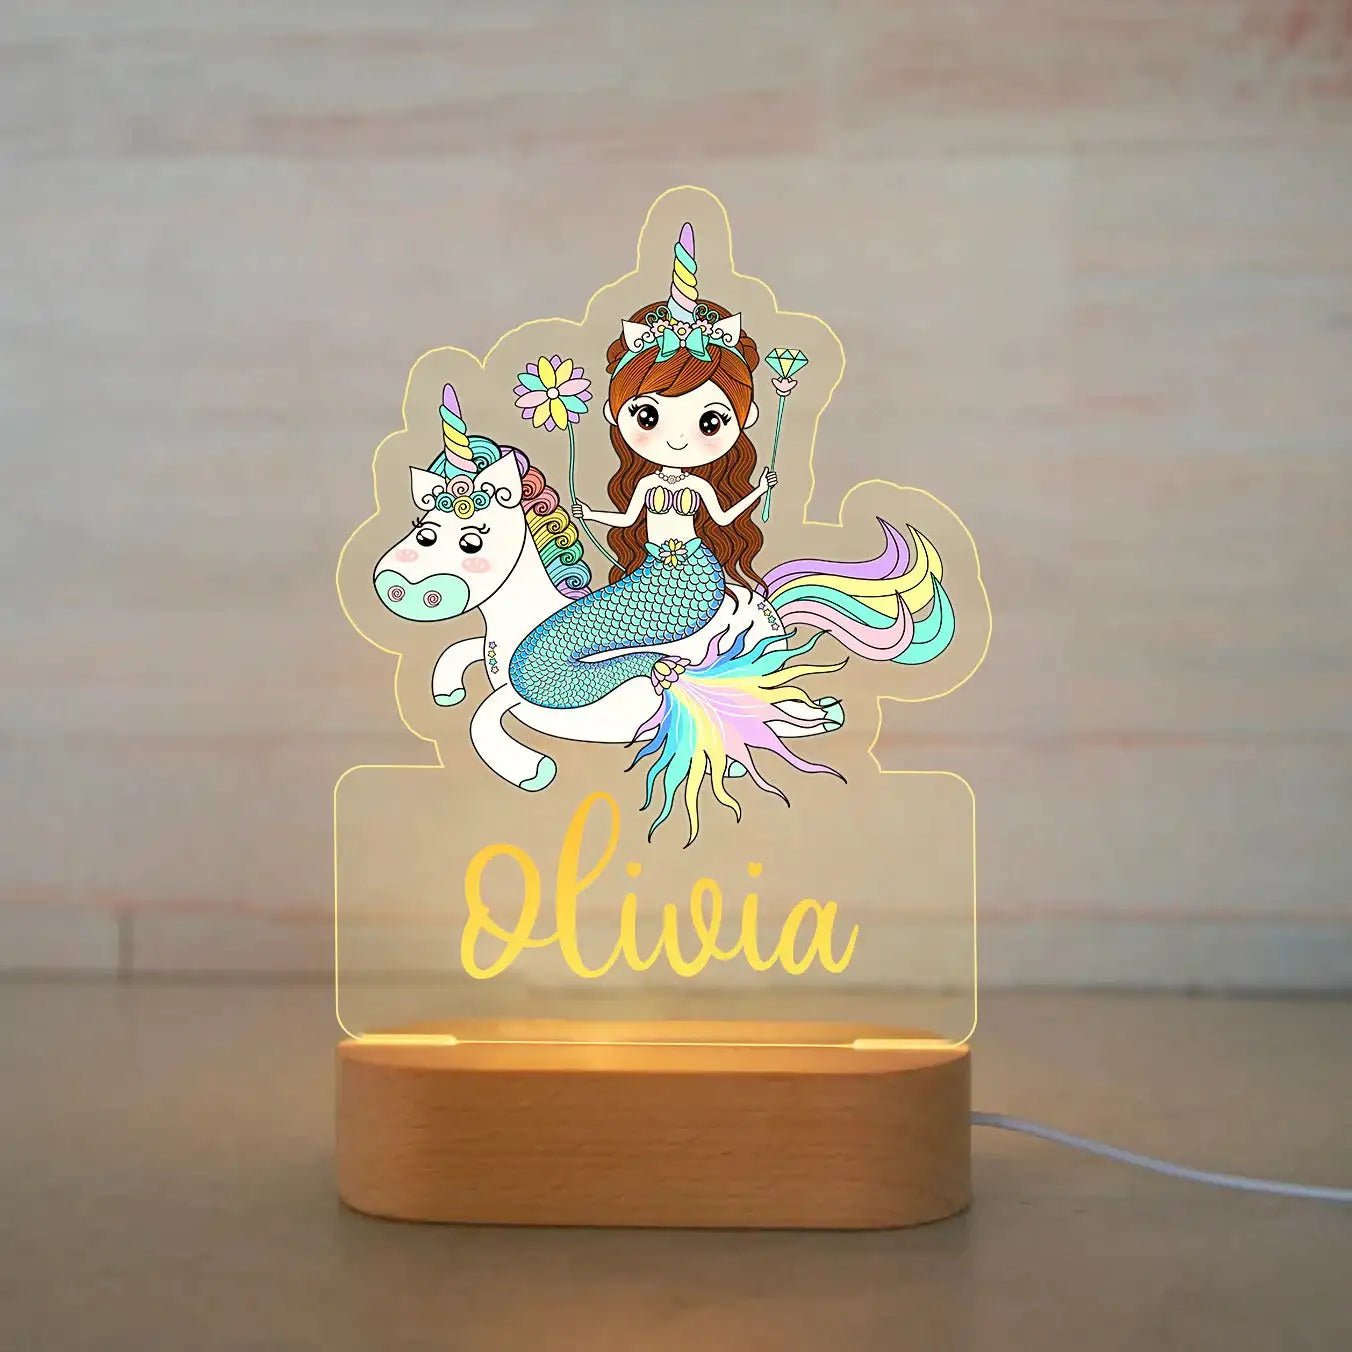 Customized Animal-themed Night Light for Kids - Personalized with Child's Name, Acrylic Lamp for Bedroom Decor Warm Light / 16Unicorn